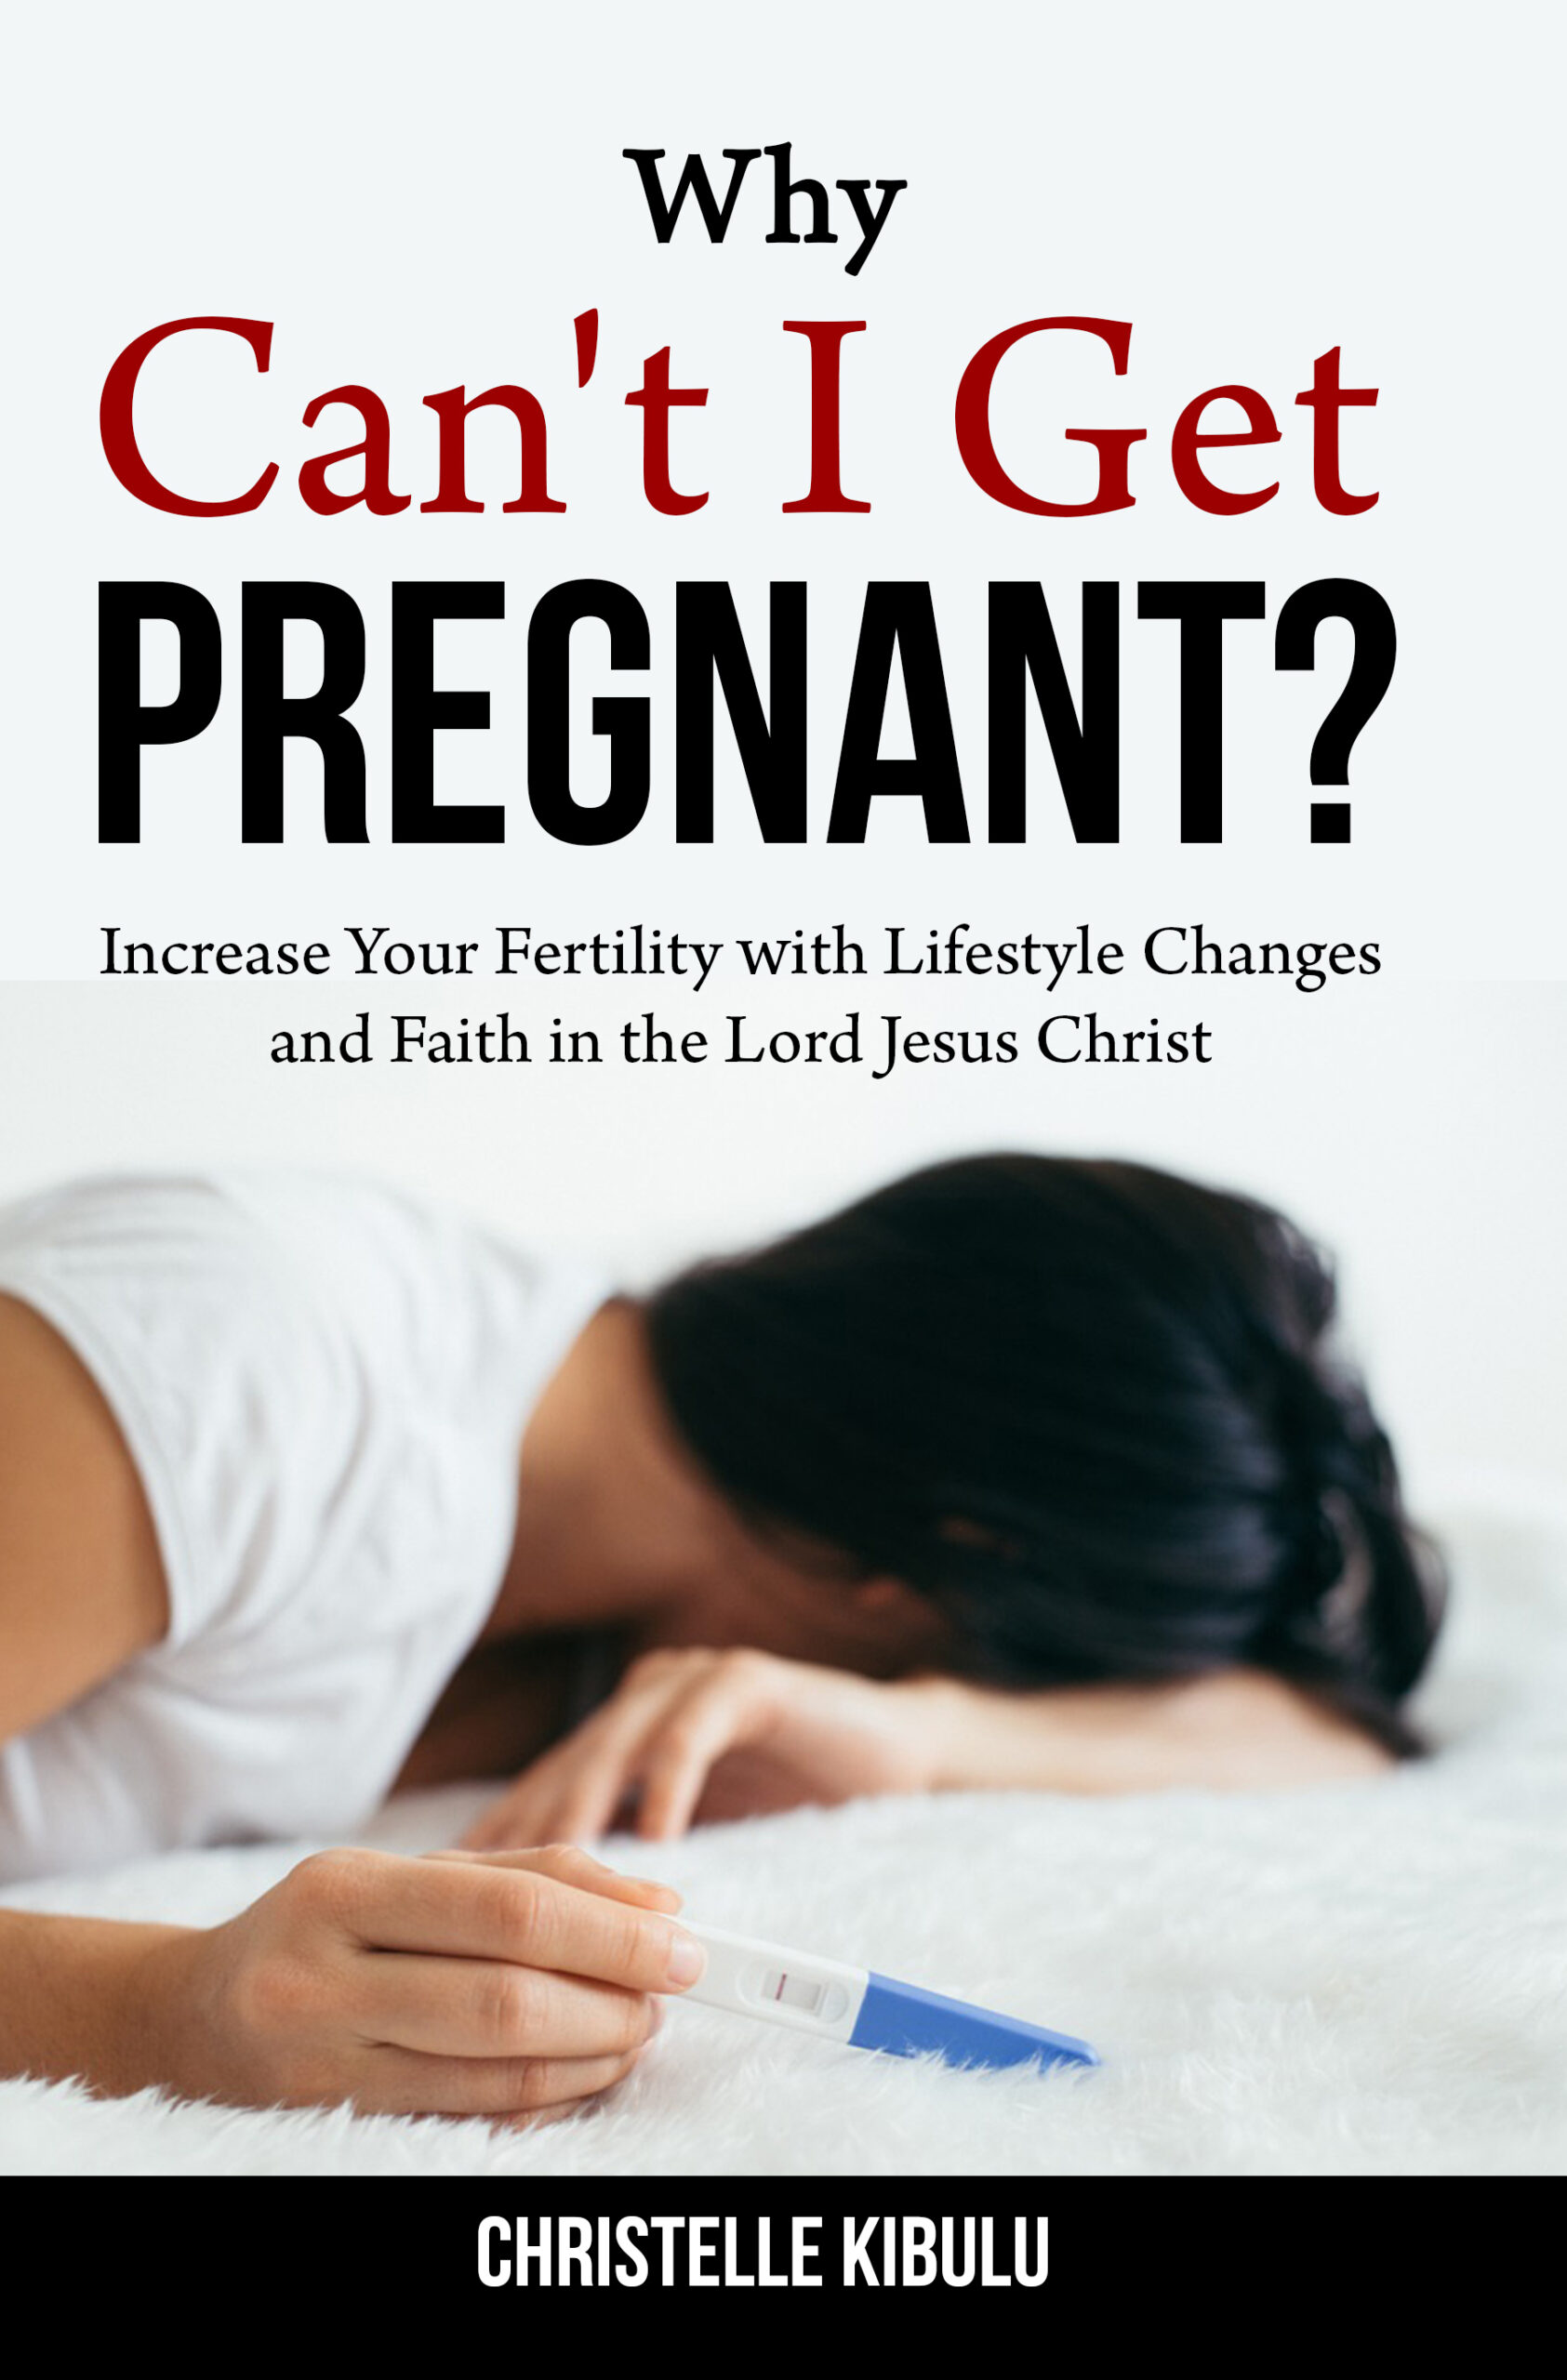 Why Can’t I Get Pregnant?: Increase Your Fertility With Lifestyle Changes and Faith in the Lord Jesus Christ. by Christelle Kibulu